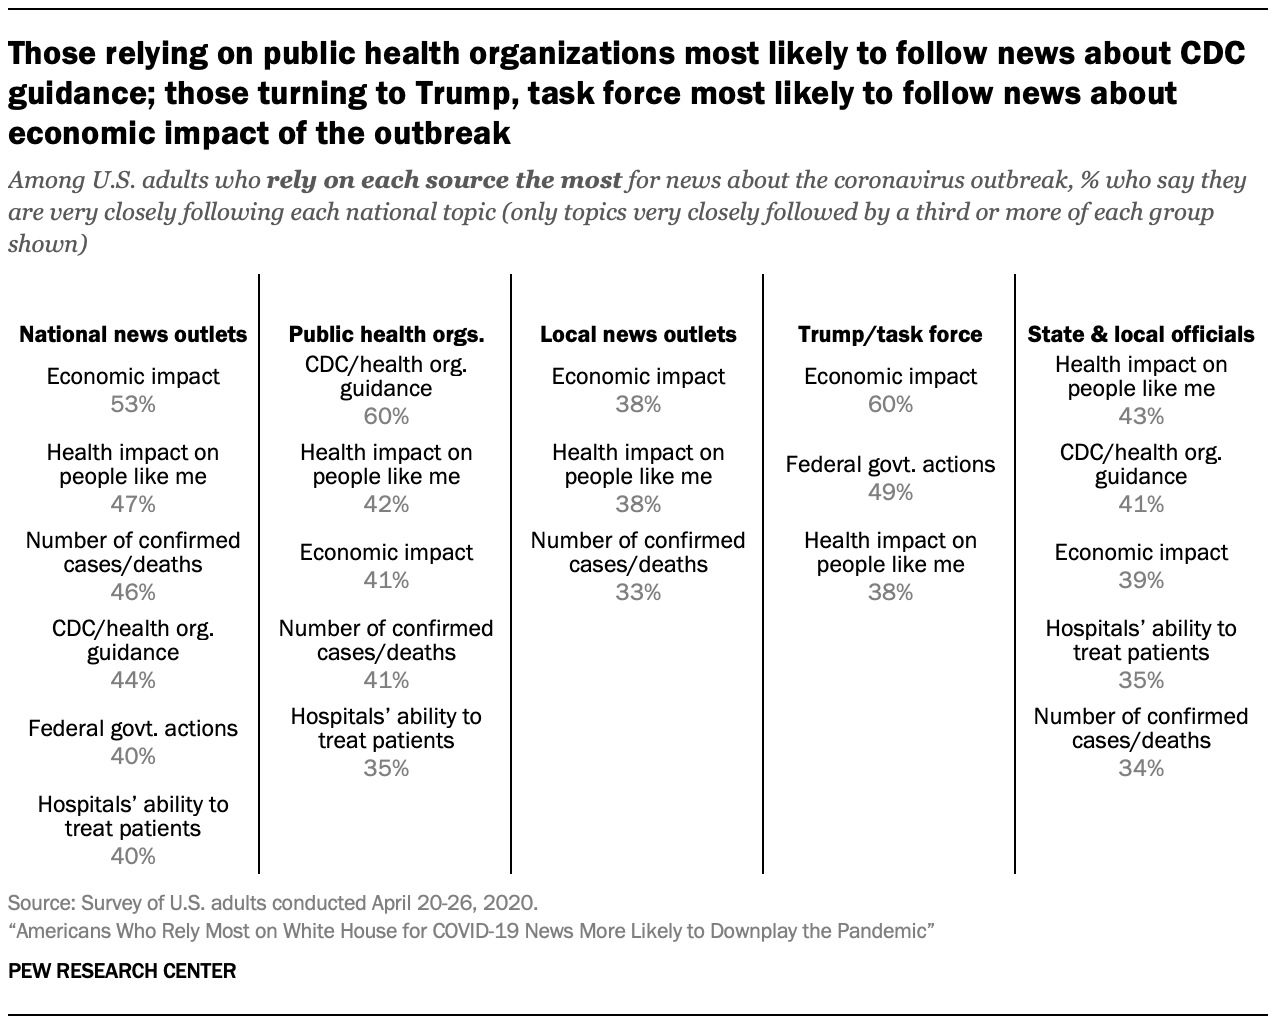 Those relying on public health organizations most likely to follow news about CDC guidance; those turning to Trump, task force most likely to follow news about economic impact of the outbreak